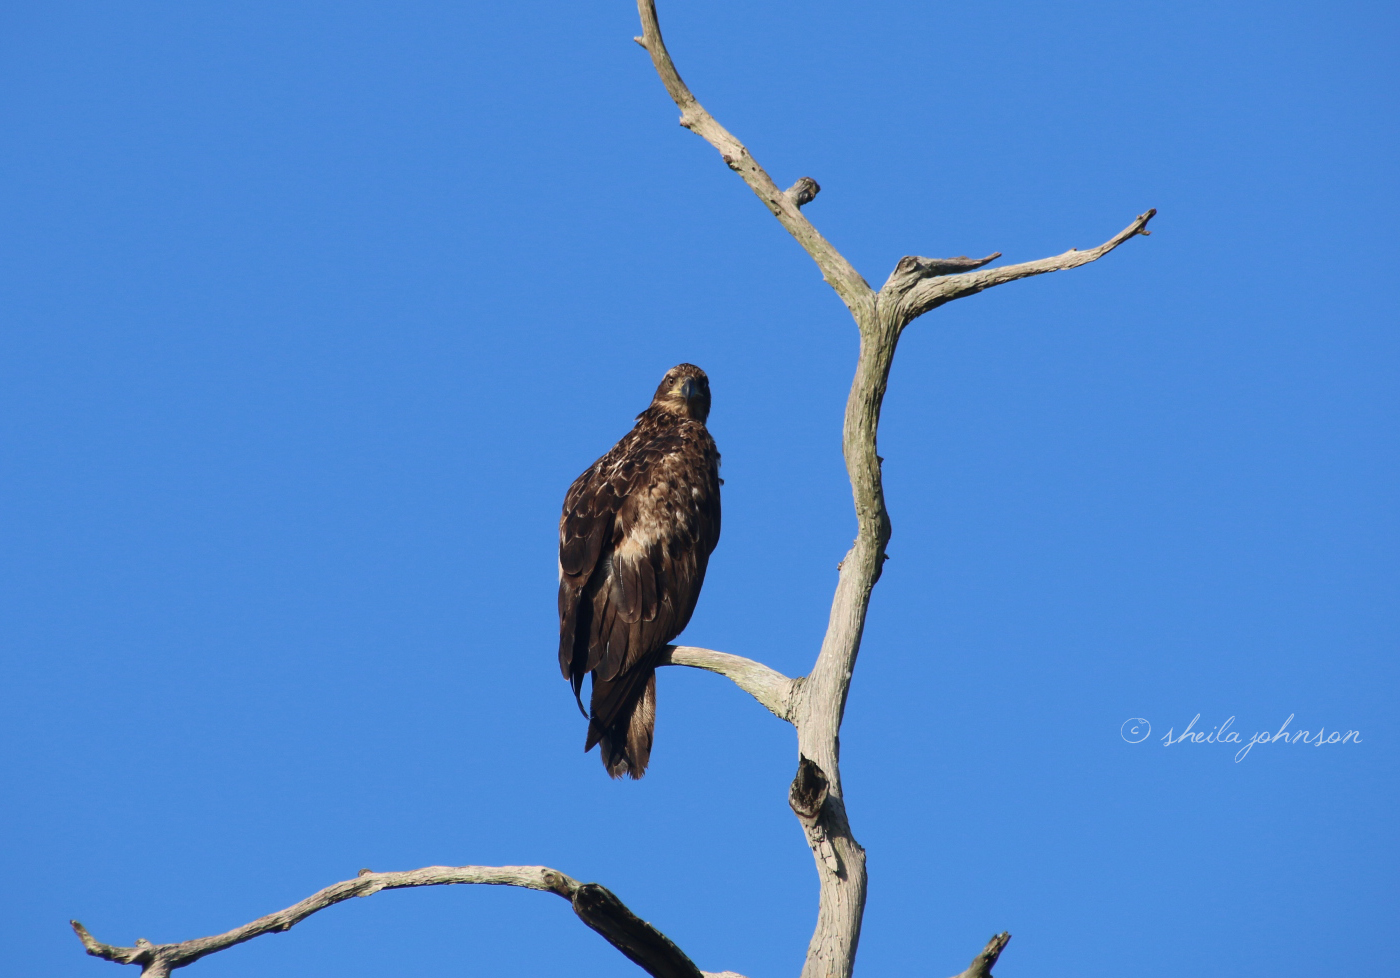 This Was The First Time I Saw An Eagle (And Last Time I Saw A Juvenile Eagle) At Kiplinger Preserve In Stuart, Florida, And I Had The Feeling He Didn't Expect To See Me Anymore Than I Expected To See Him.